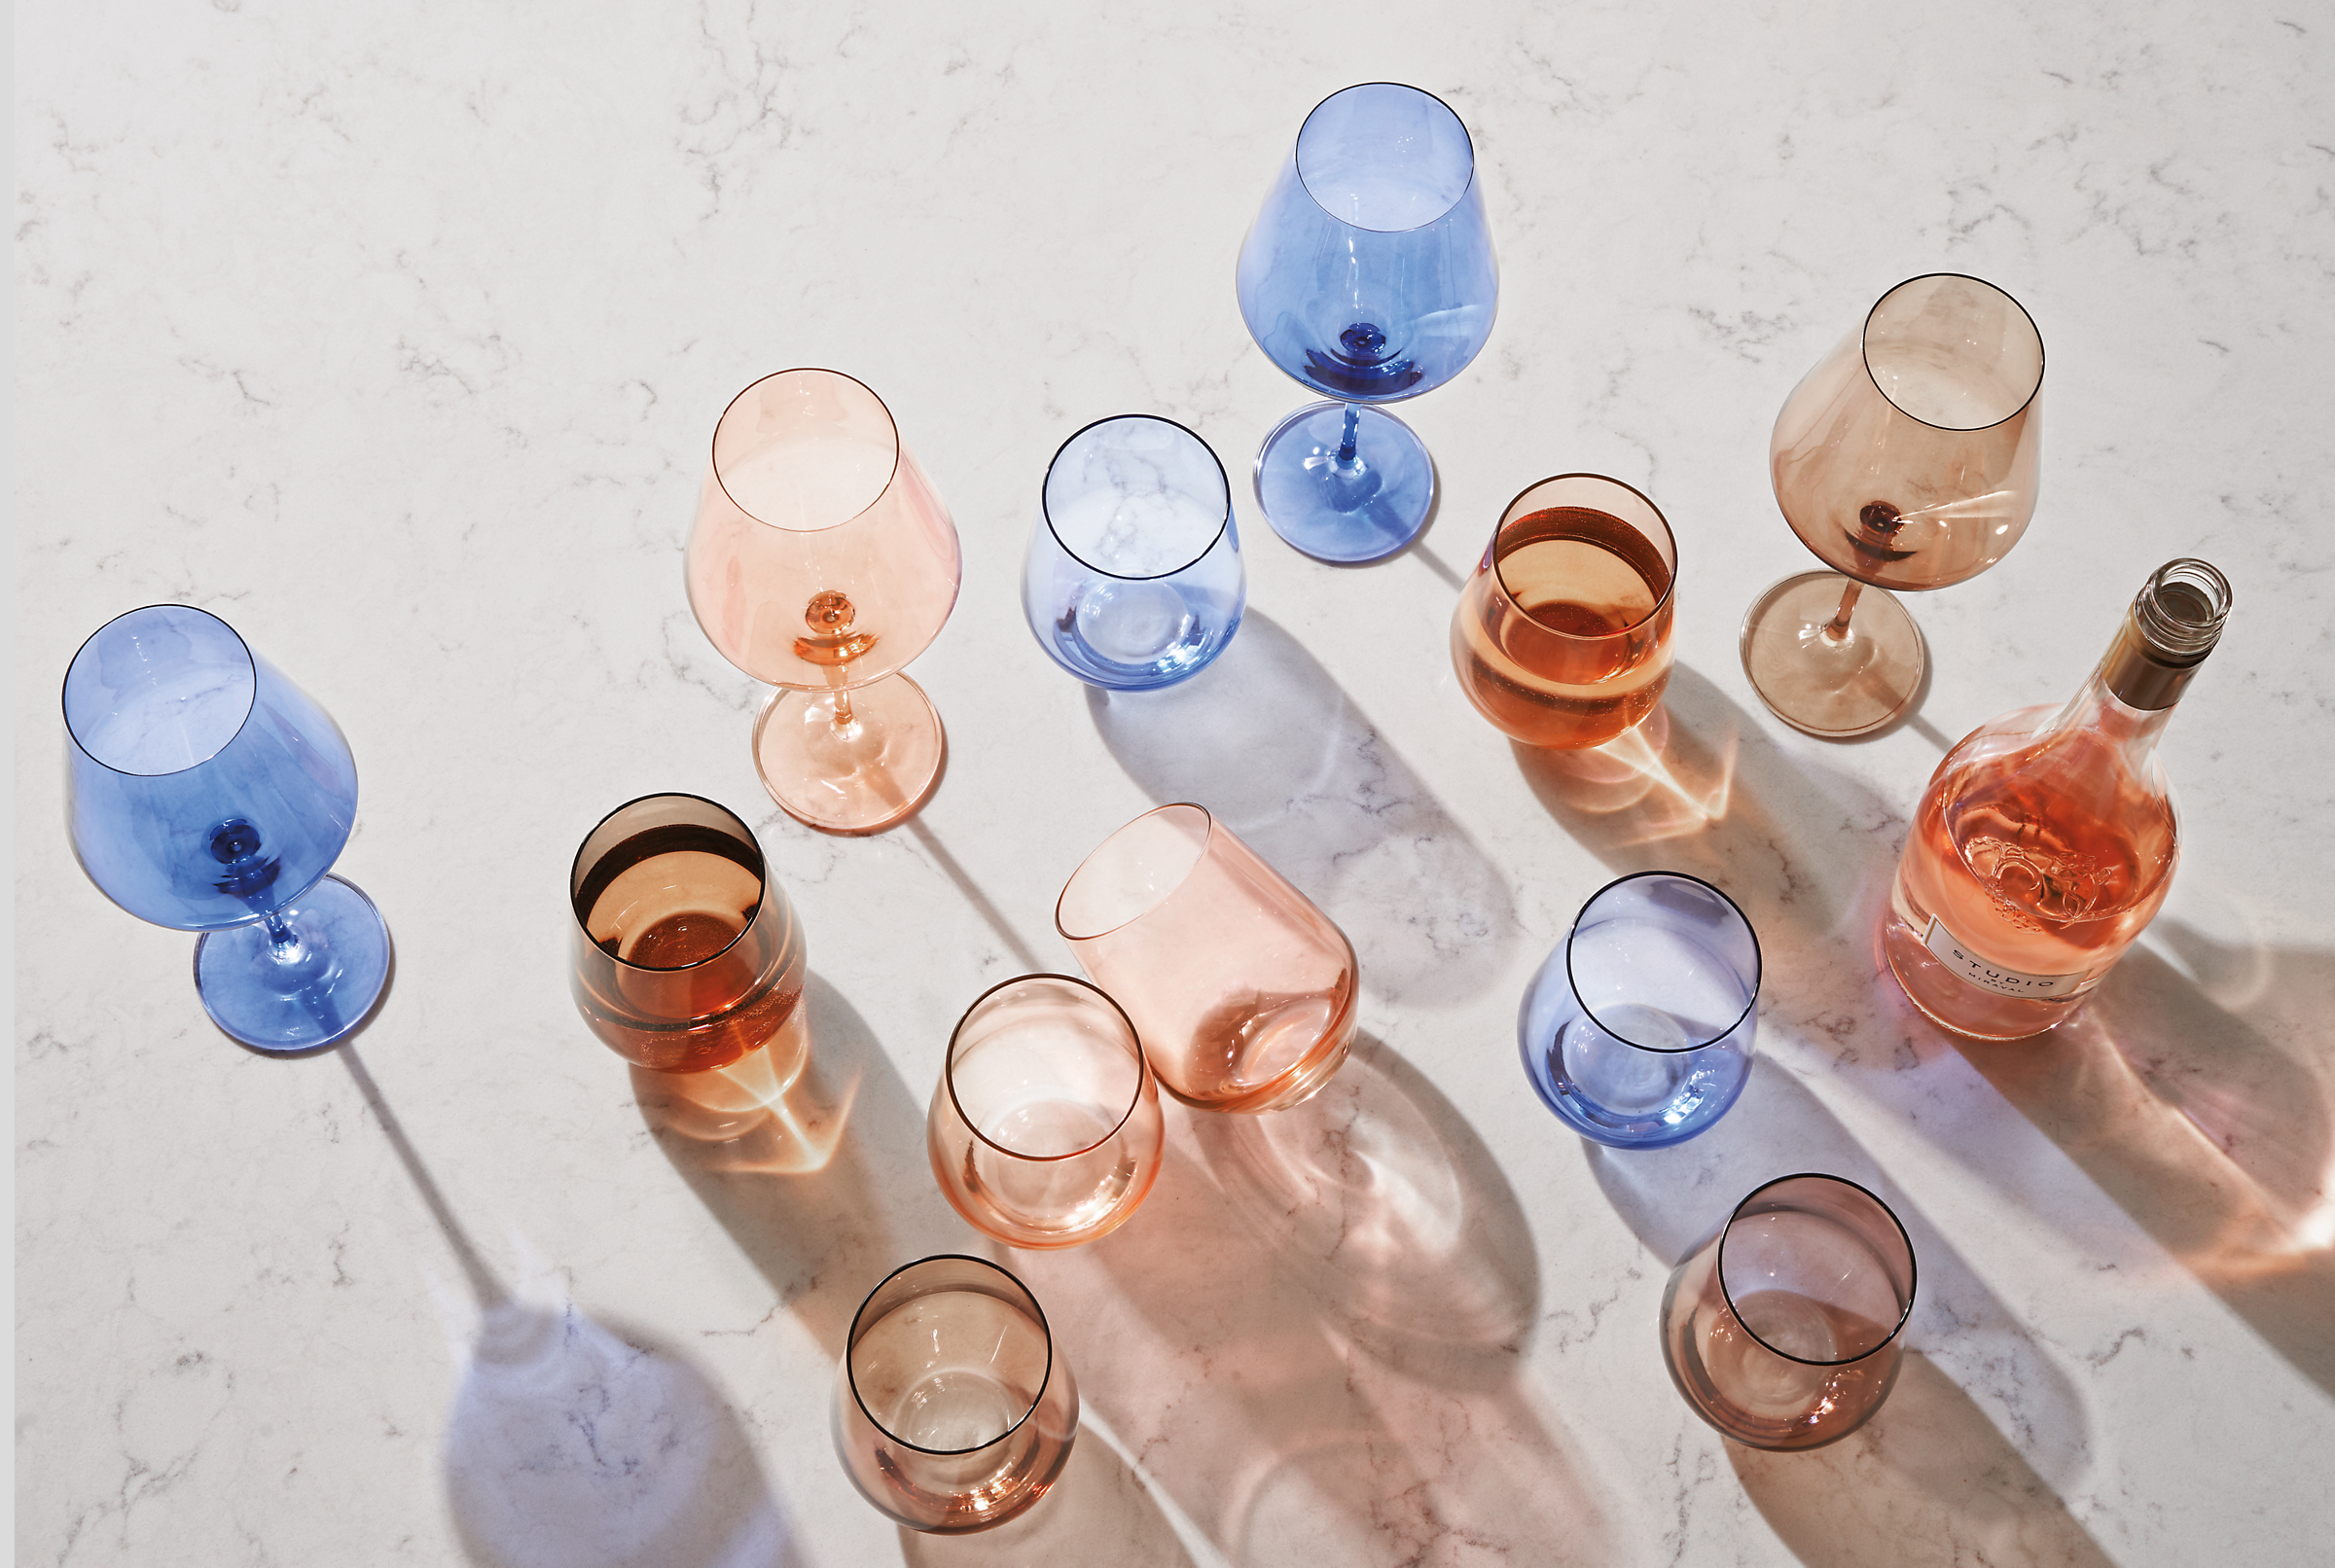 detail of estelle glassware in blue, blush and amber on marbled white quartz tabletop.